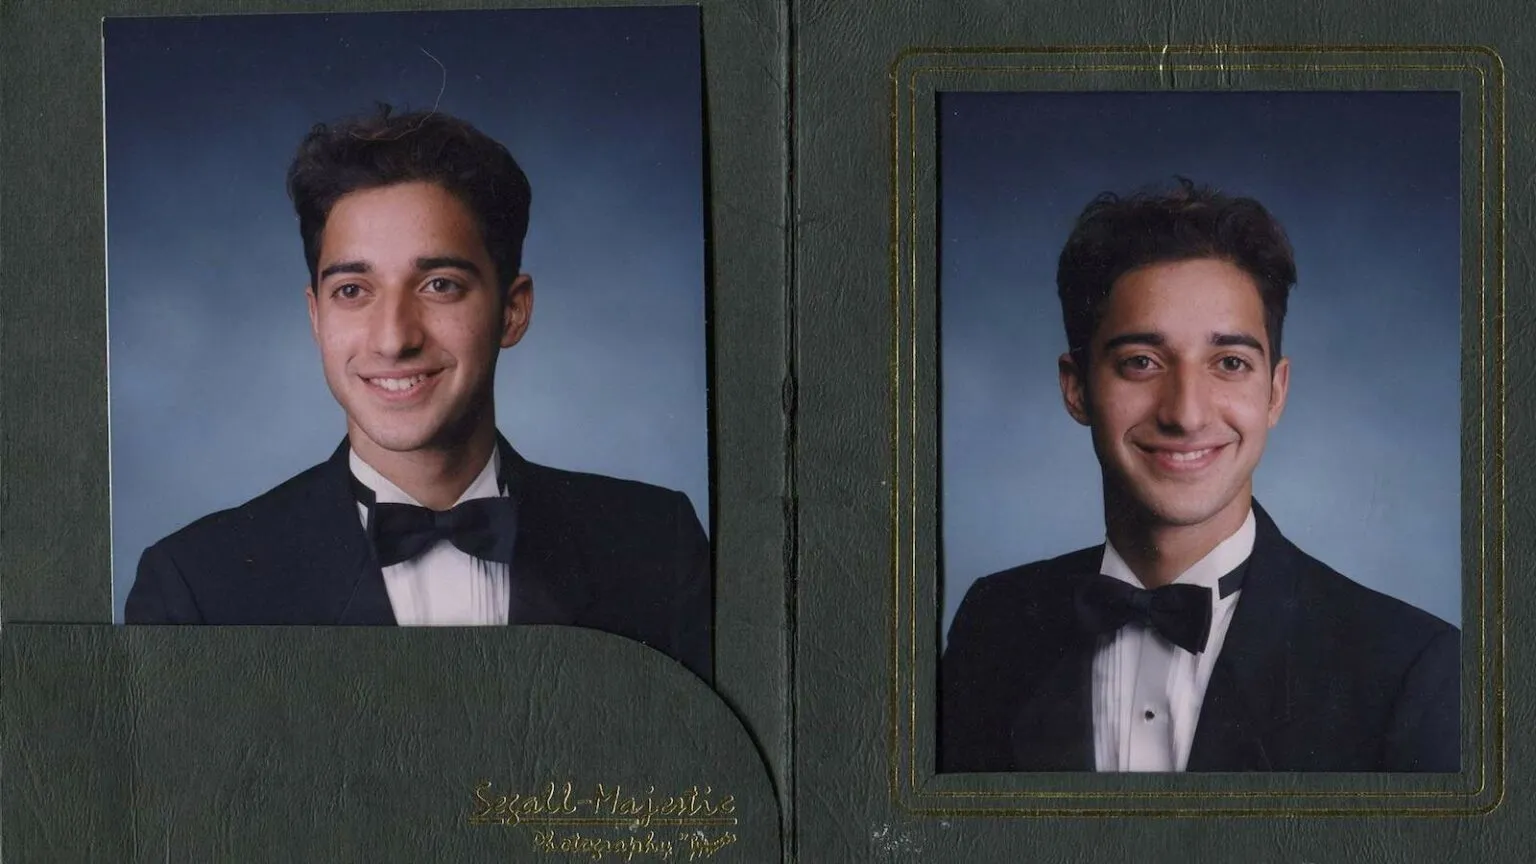 adnan-syed-s-conviction-overturned-after-serial-brought-attention-to-his-case